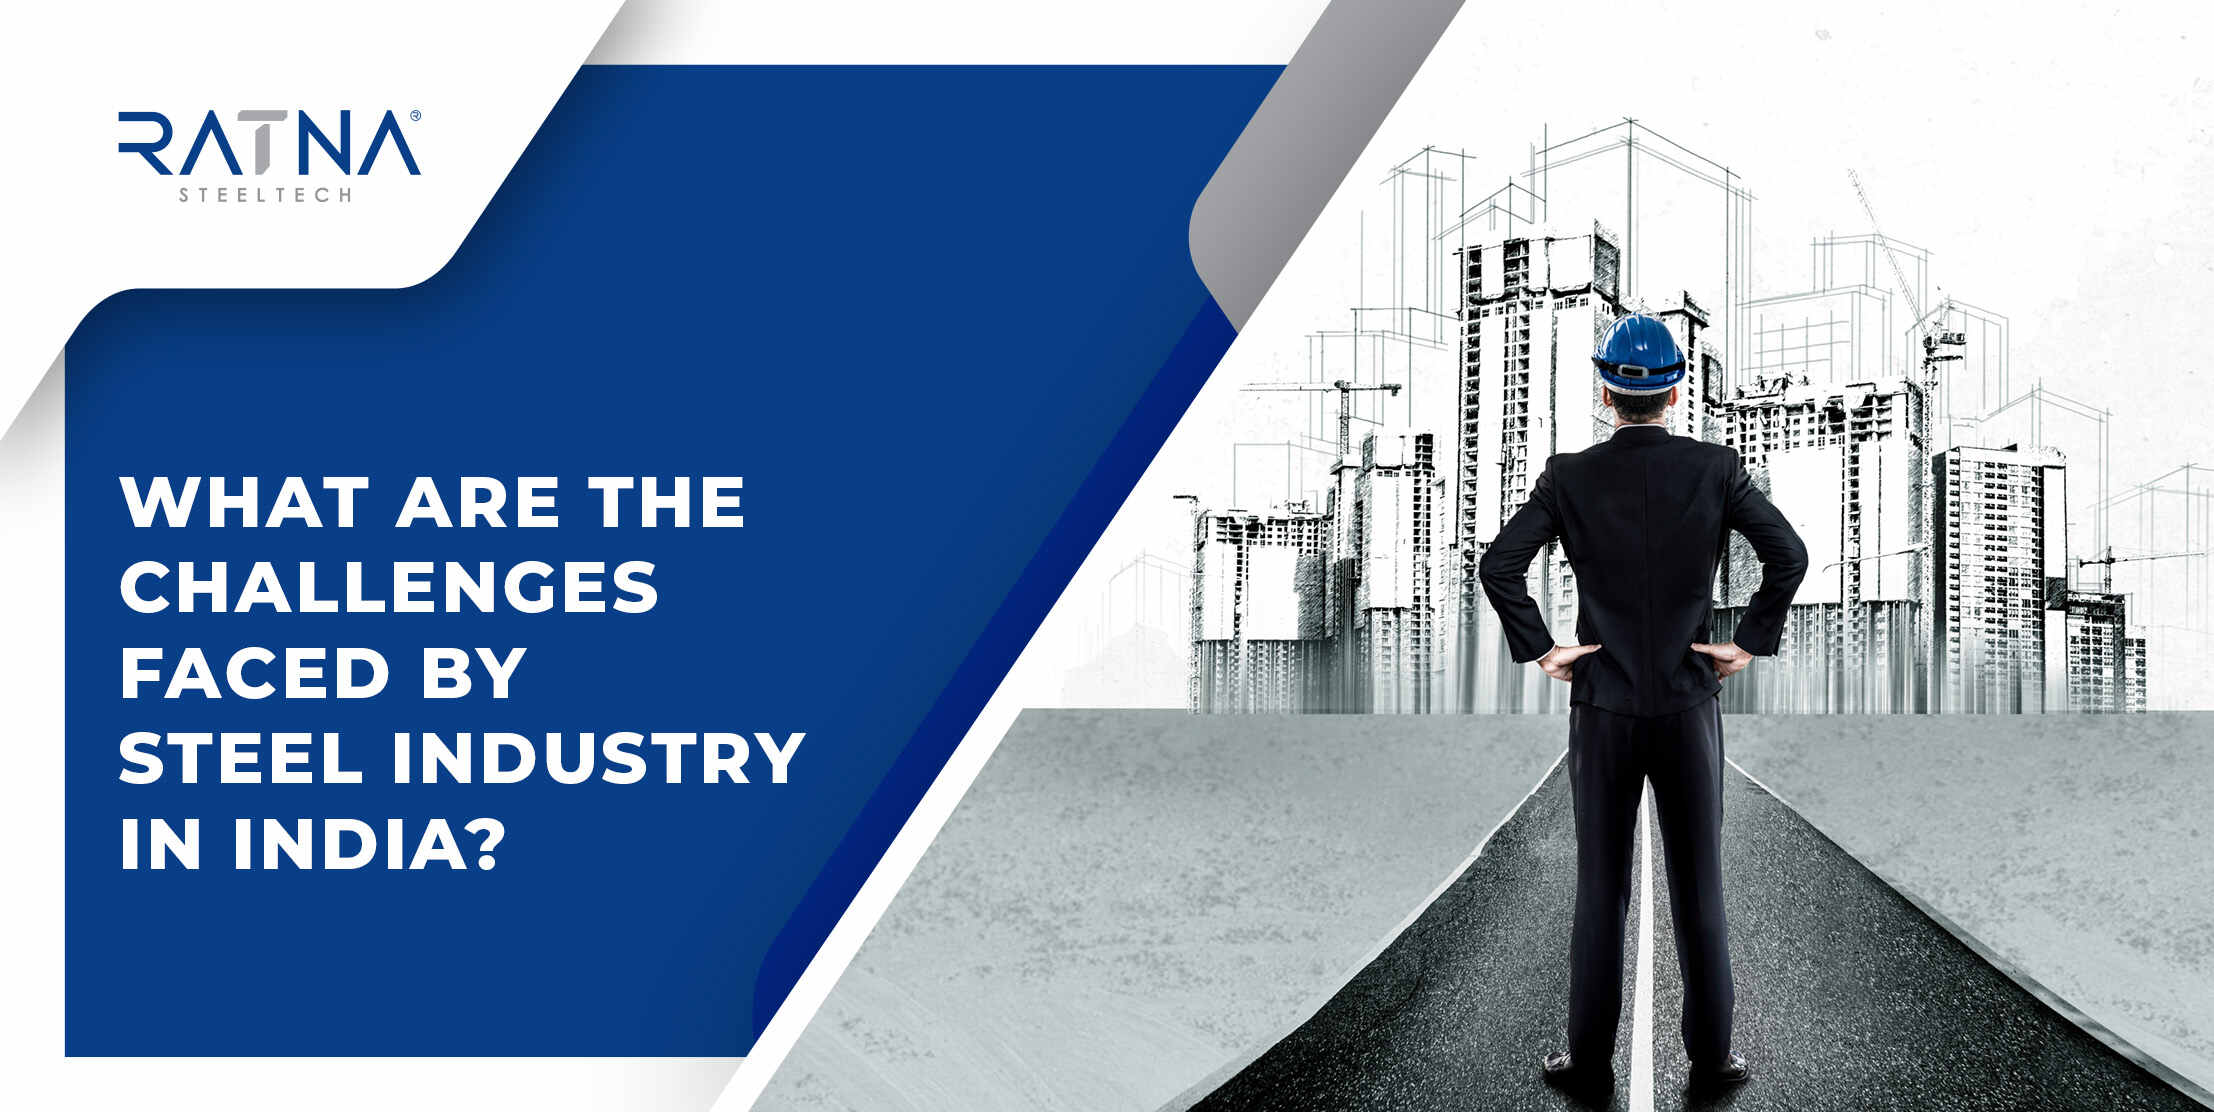 What are the challenges faced by the Steel Industry in India